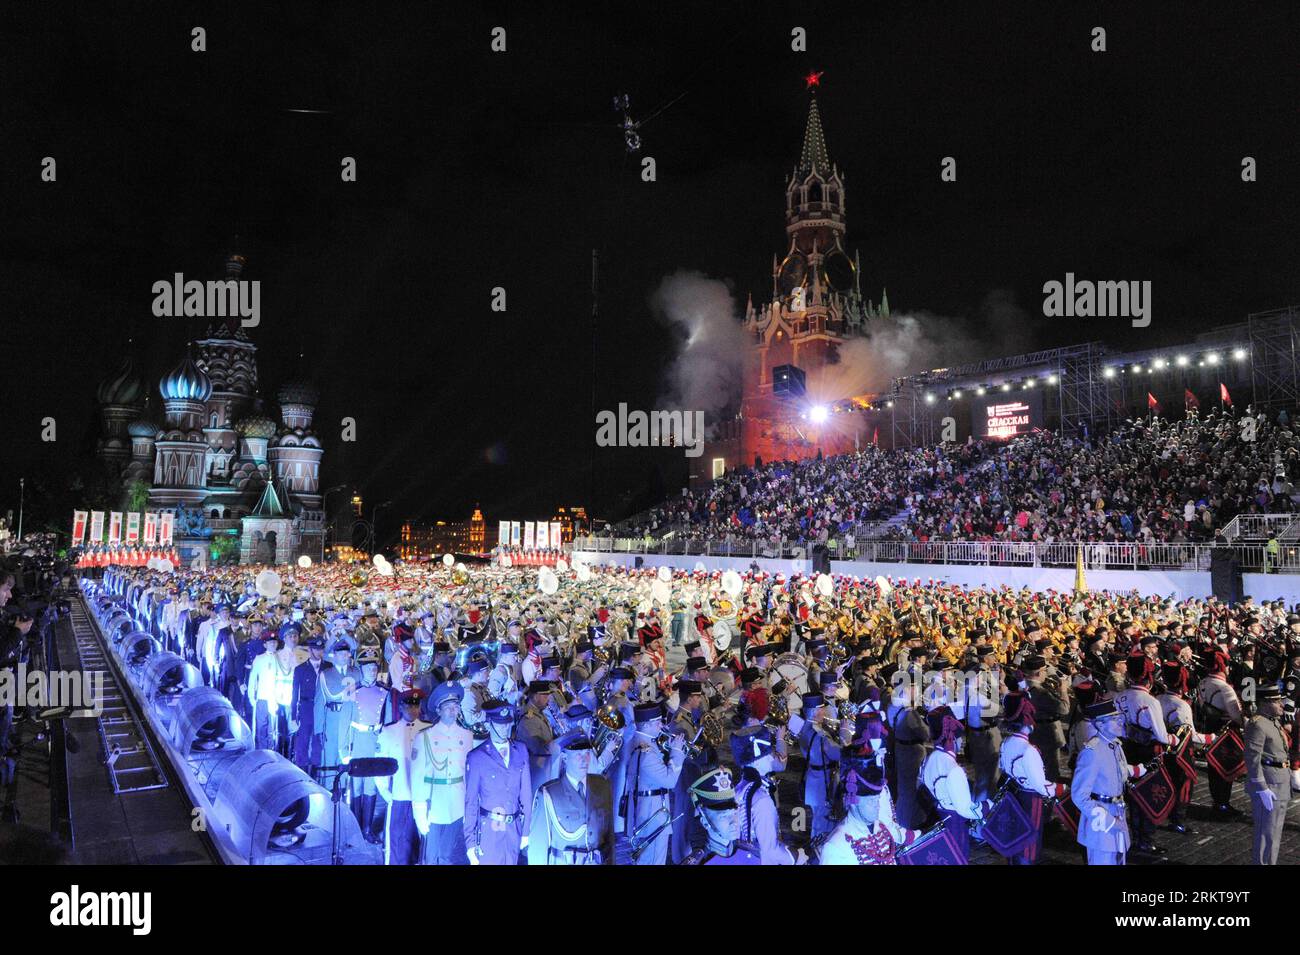 Bildnummer: 58416198  Datum: 01.09.2012  Copyright: imago/Xinhua  MOSCOW,  2012 (Xinhua) -- Fireworks explode during the International Military Music Festival at Red Square in Moscow, on Sept. 1, 2012. Military bands from different countries participate in the annual tattoo. (Xinhua/Pavel) (lr) RUSSIA-MOSCOW-INTERNATIONAL MILITARY MUSIC FESTIVAL PUBLICATIONxNOTxINxCHN Gesellschaft Militär Musik Militärmusik Musikfestival Militärmusikfestival xas x0x premiumd 2012 quer     58416198 Date 01 09 2012 Copyright Imago XINHUA Moscow 2012 XINHUA Fireworks explode during The International Military Musi Stock Photo